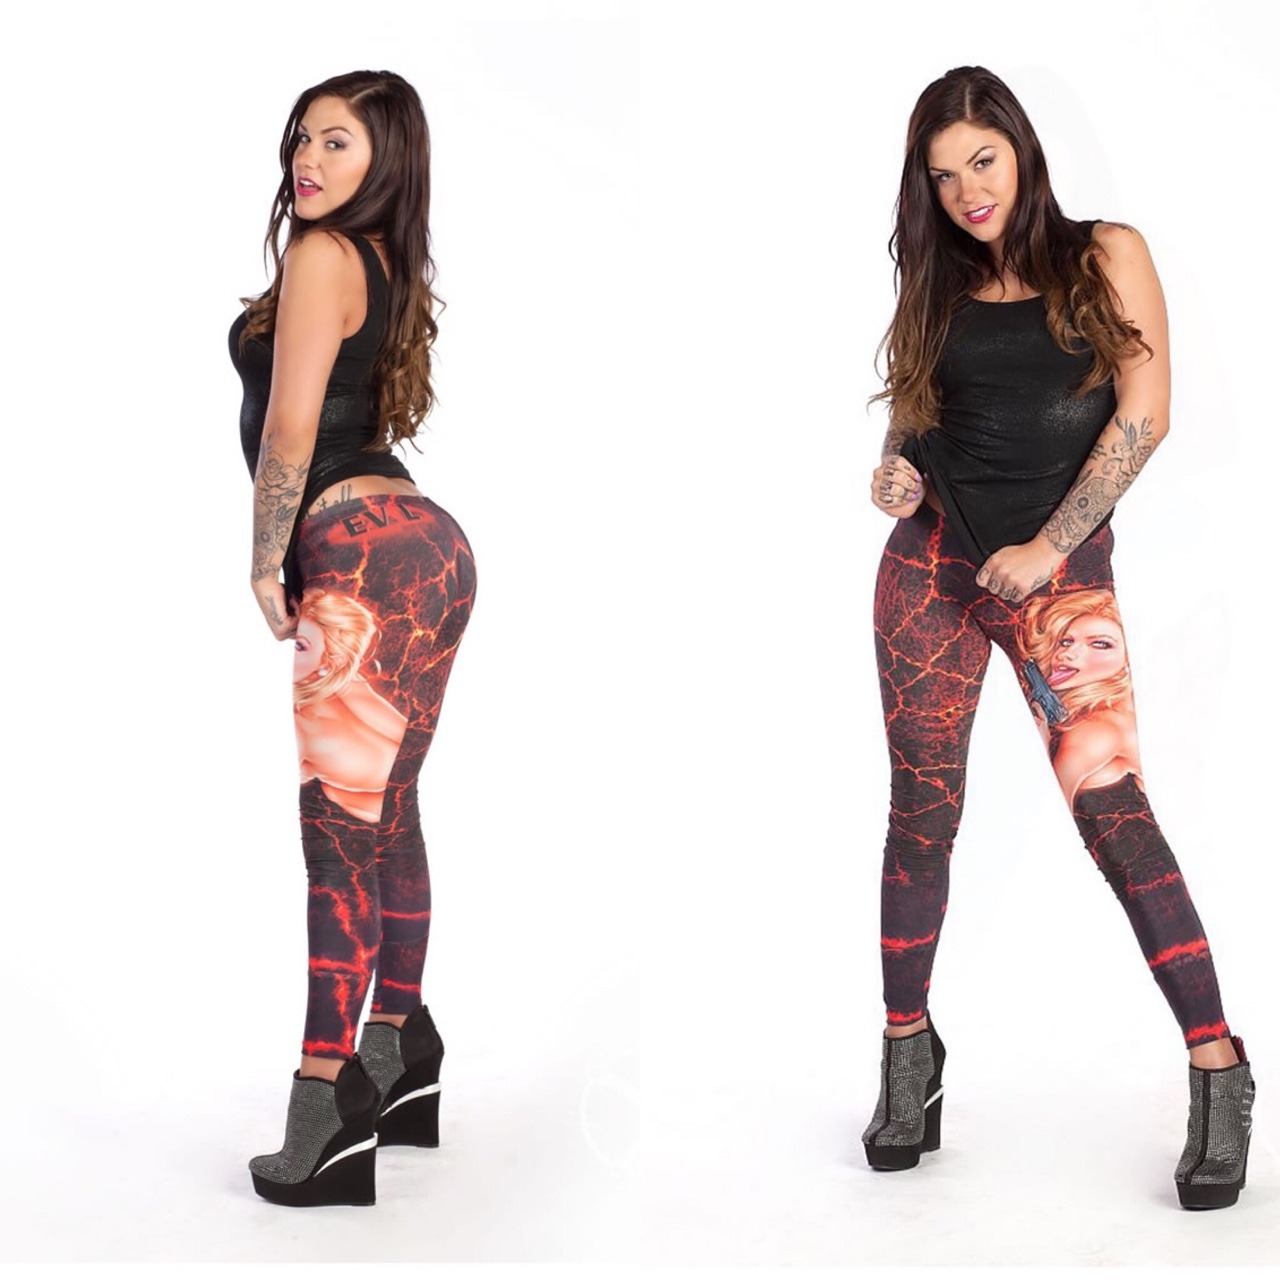 Leggings by Evil Angel EA Products. You can buy that at www.pervhub.com